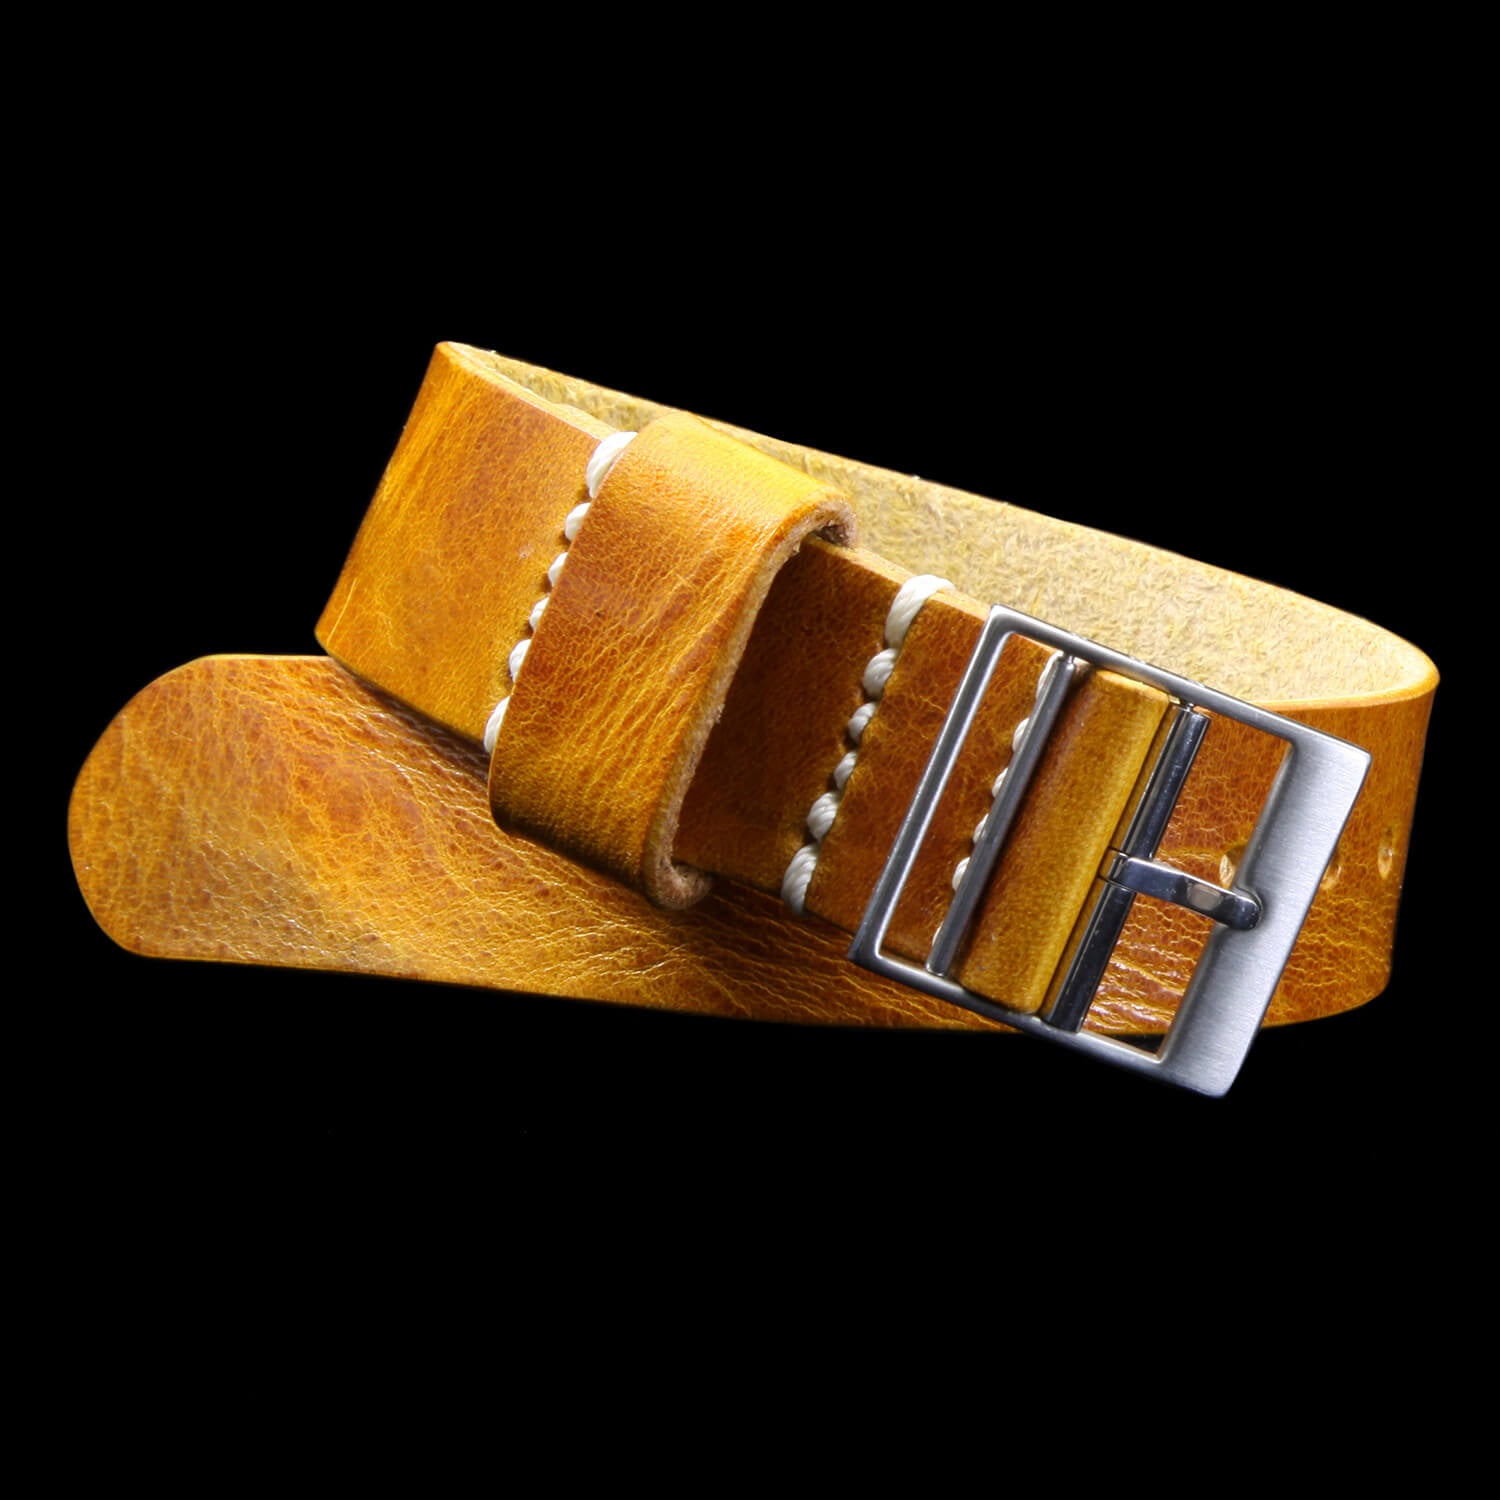 Leather Watch Strap, Classic RAF II Military 104 | Ladder Buckle | Full Grain Italian Vegetable-Tanned Leather | Cozy Handmade